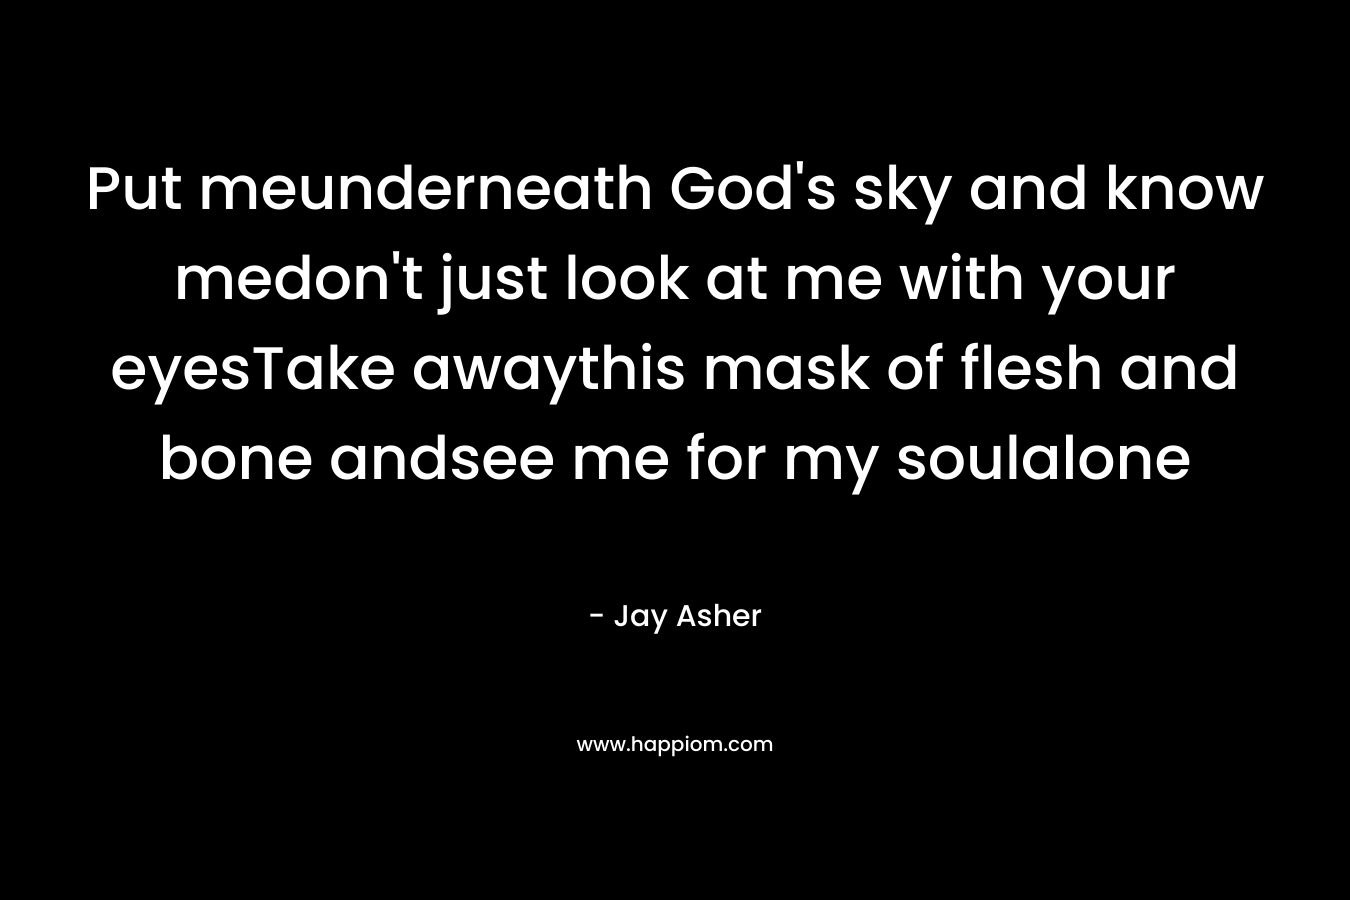 Put meunderneath God’s sky and know medon’t just look at me with your eyesTake awaythis mask of flesh and bone andsee me for my soulalone – Jay Asher